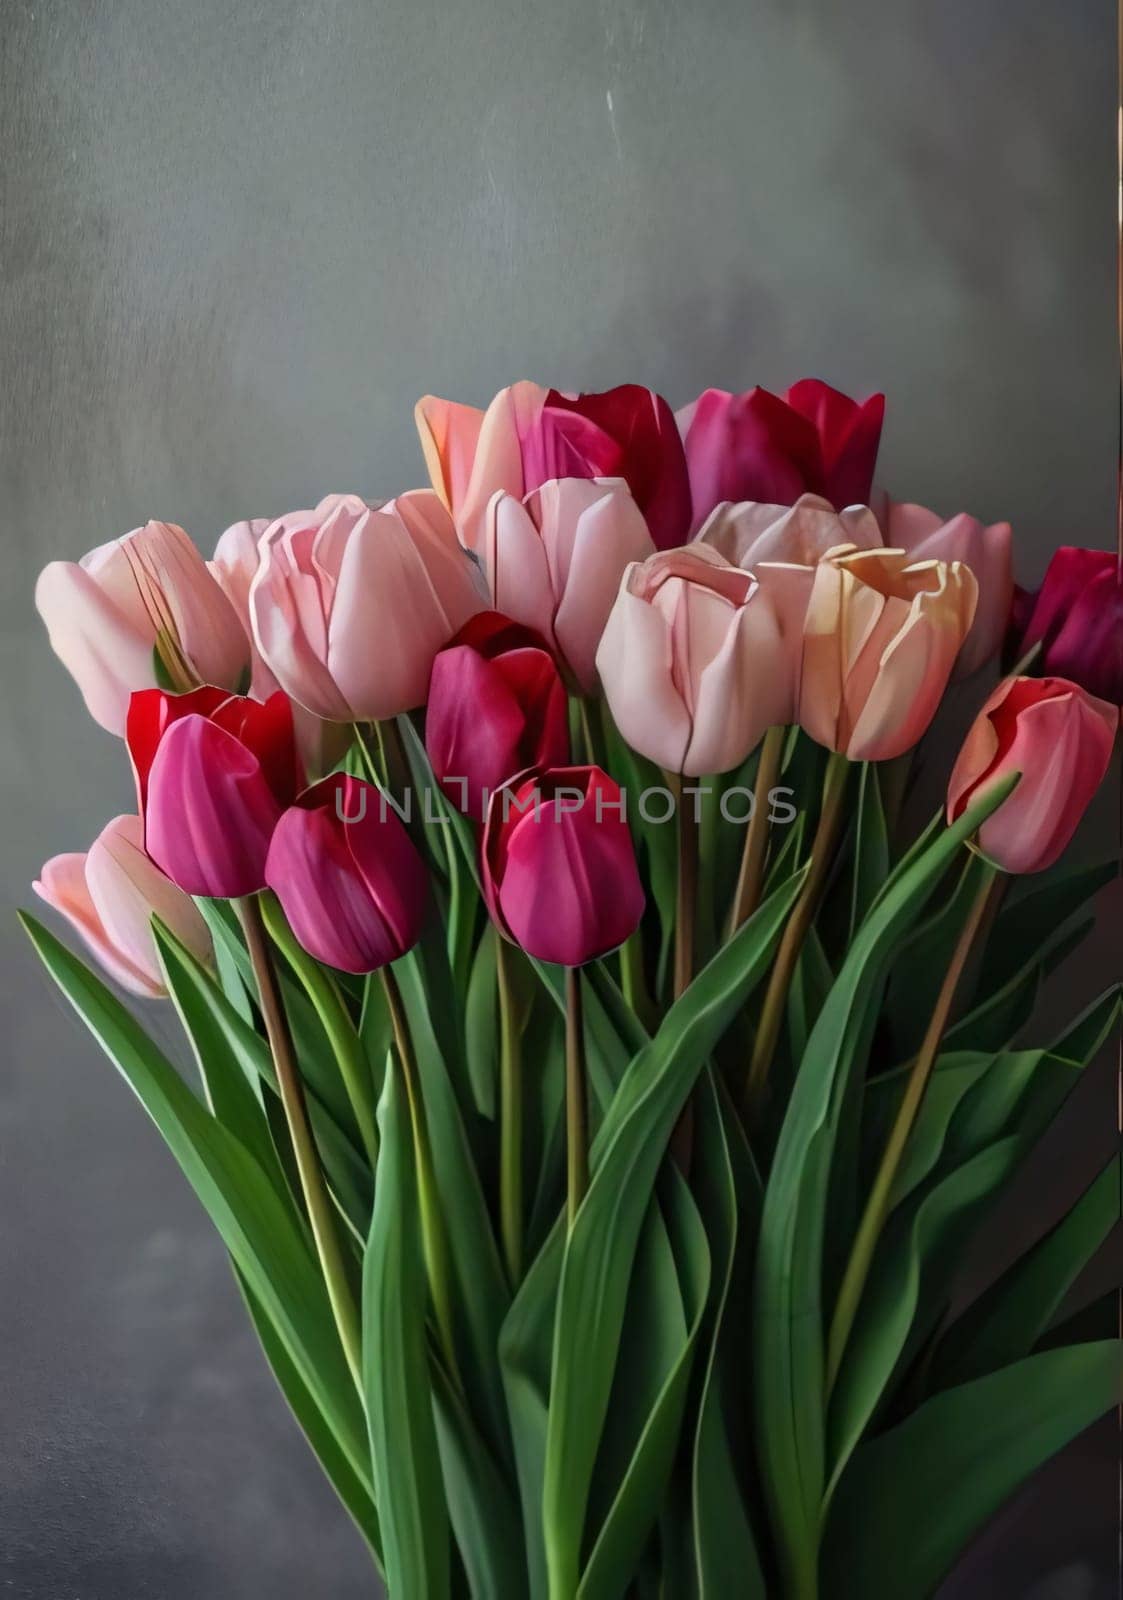 Bouquet of pink and red tulips, green leaves on a gray background. Flowering flowers, a symbol of spring, new life. A joyful time of nature waking up to life.